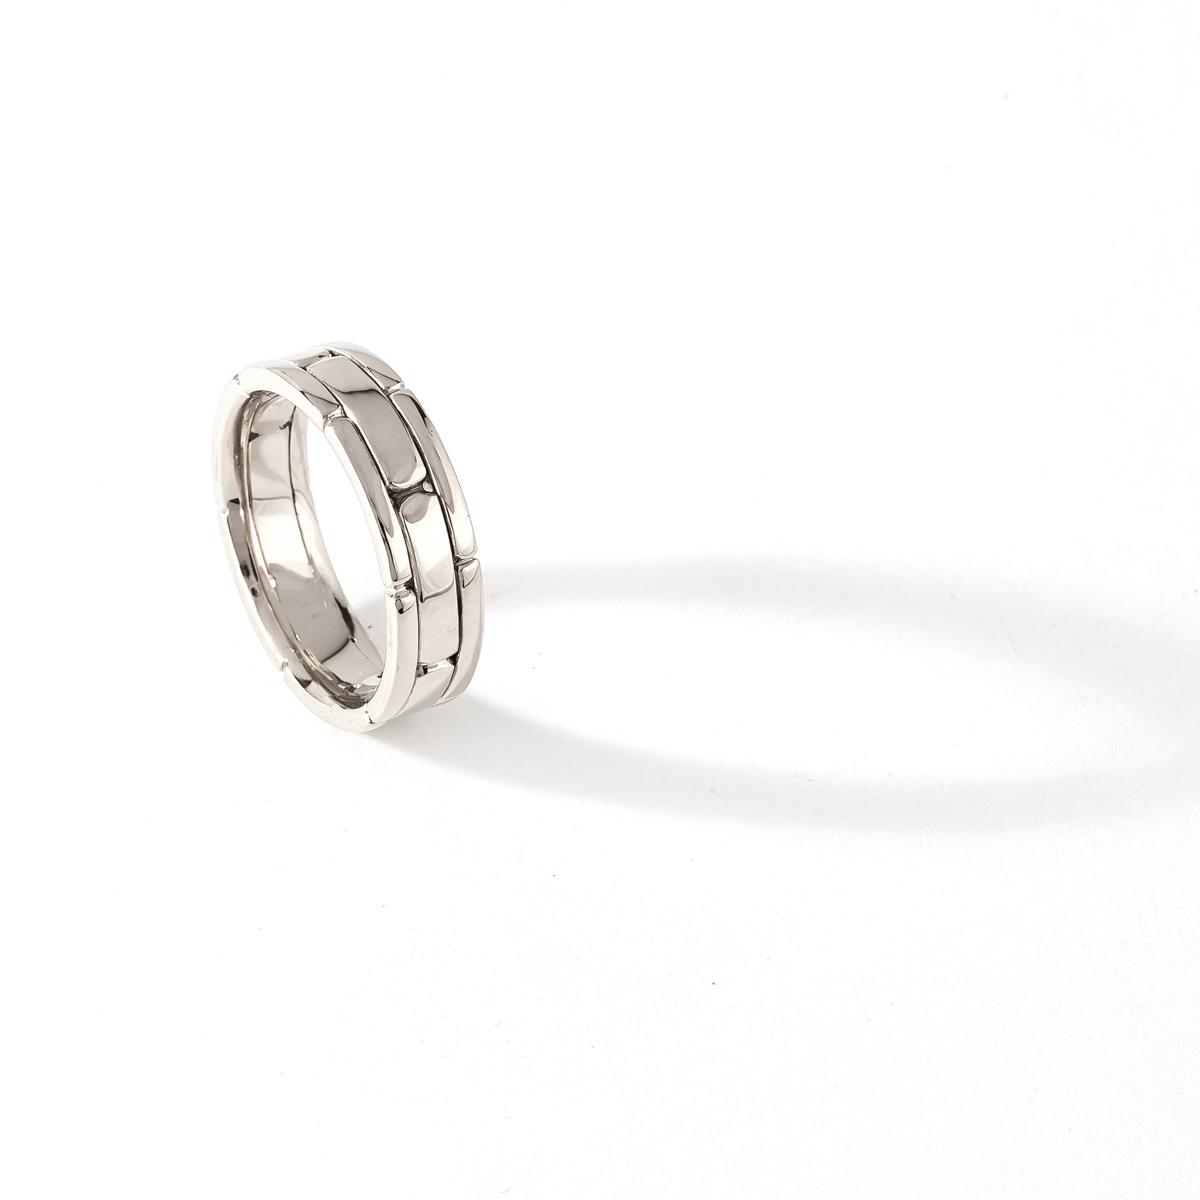 CHRIS AIRE WEDDING BAND - WHITE GOLD - Chris Aire Fine Jewelry & Timepieces